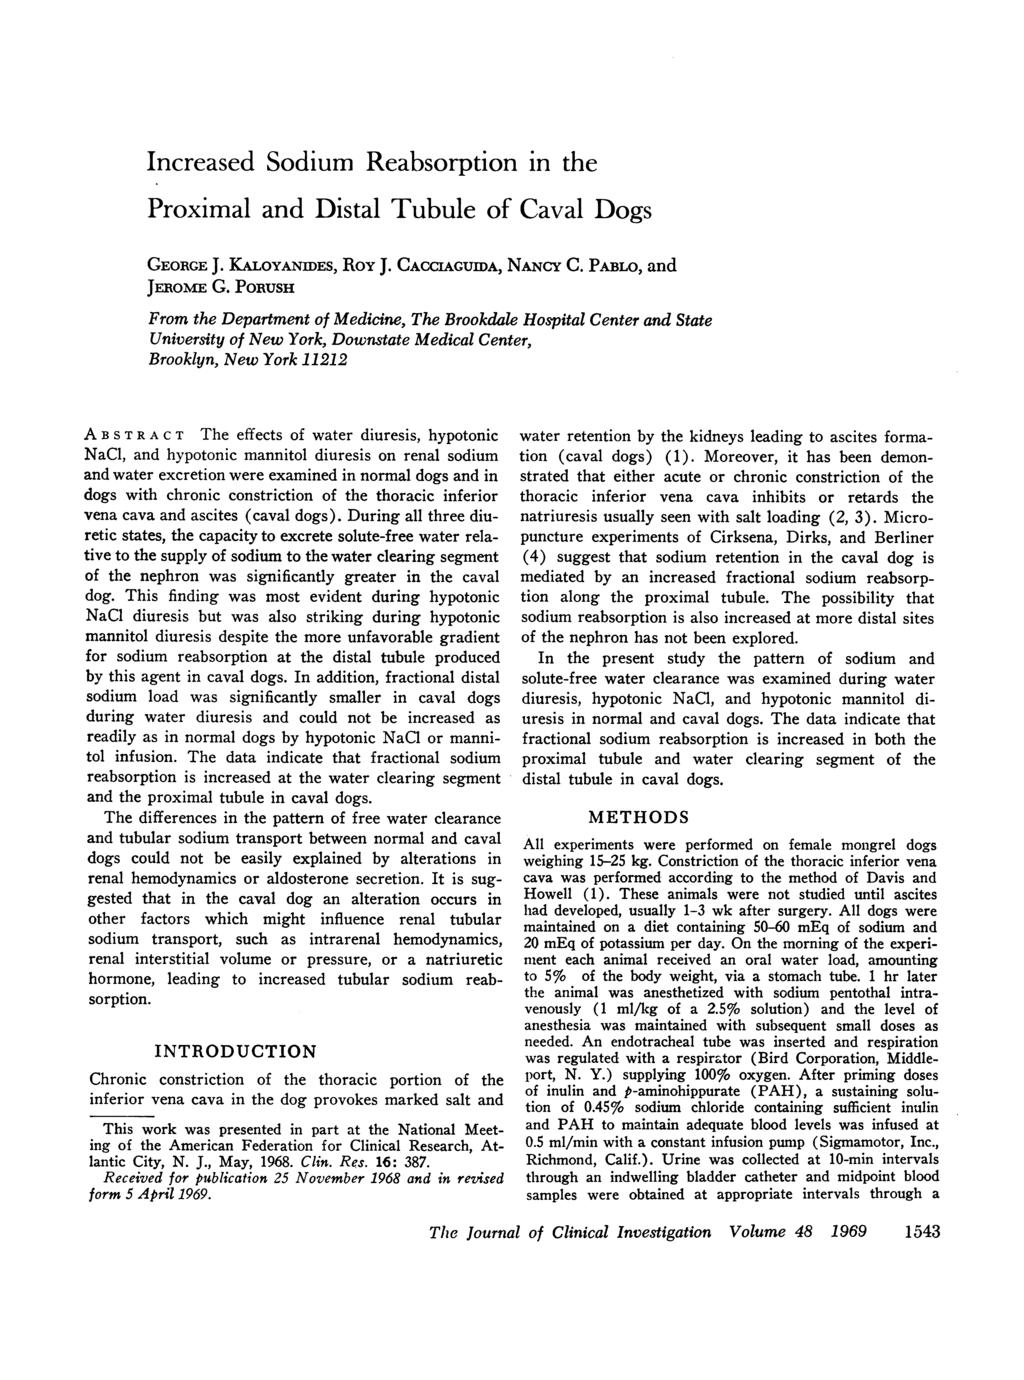 Increased Sodium Reabsorption in the Proximal and Distal Tubule of Caval Dogs GEORGE J. KALOYANIDES, RoY J. CACciAGIDA, NANCY C. PABLO, and JERoME G.